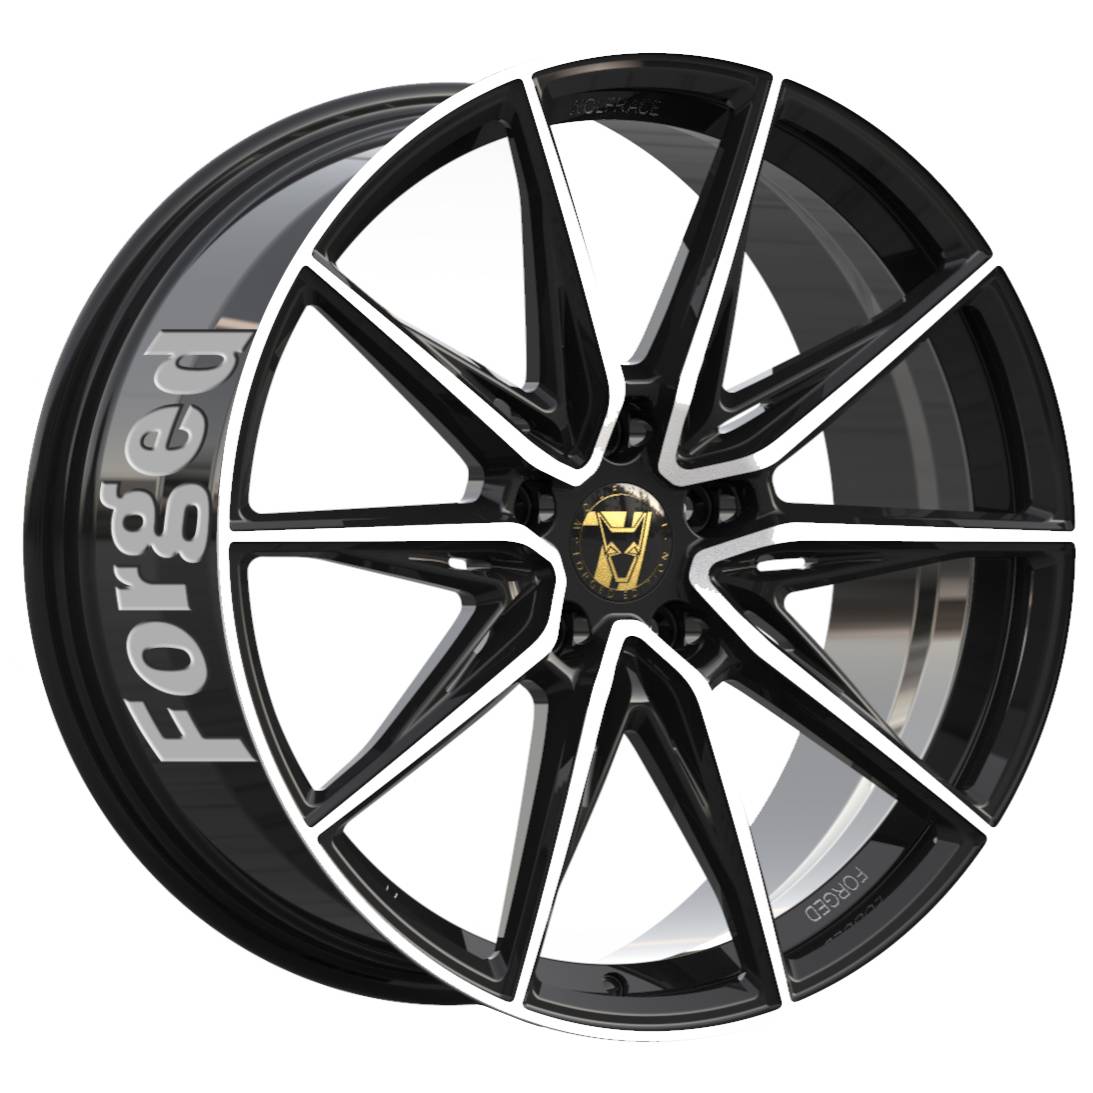 Demon Wheels 71 Forged Edition Urban Racer Forged [13x24] -5x112- ET 40